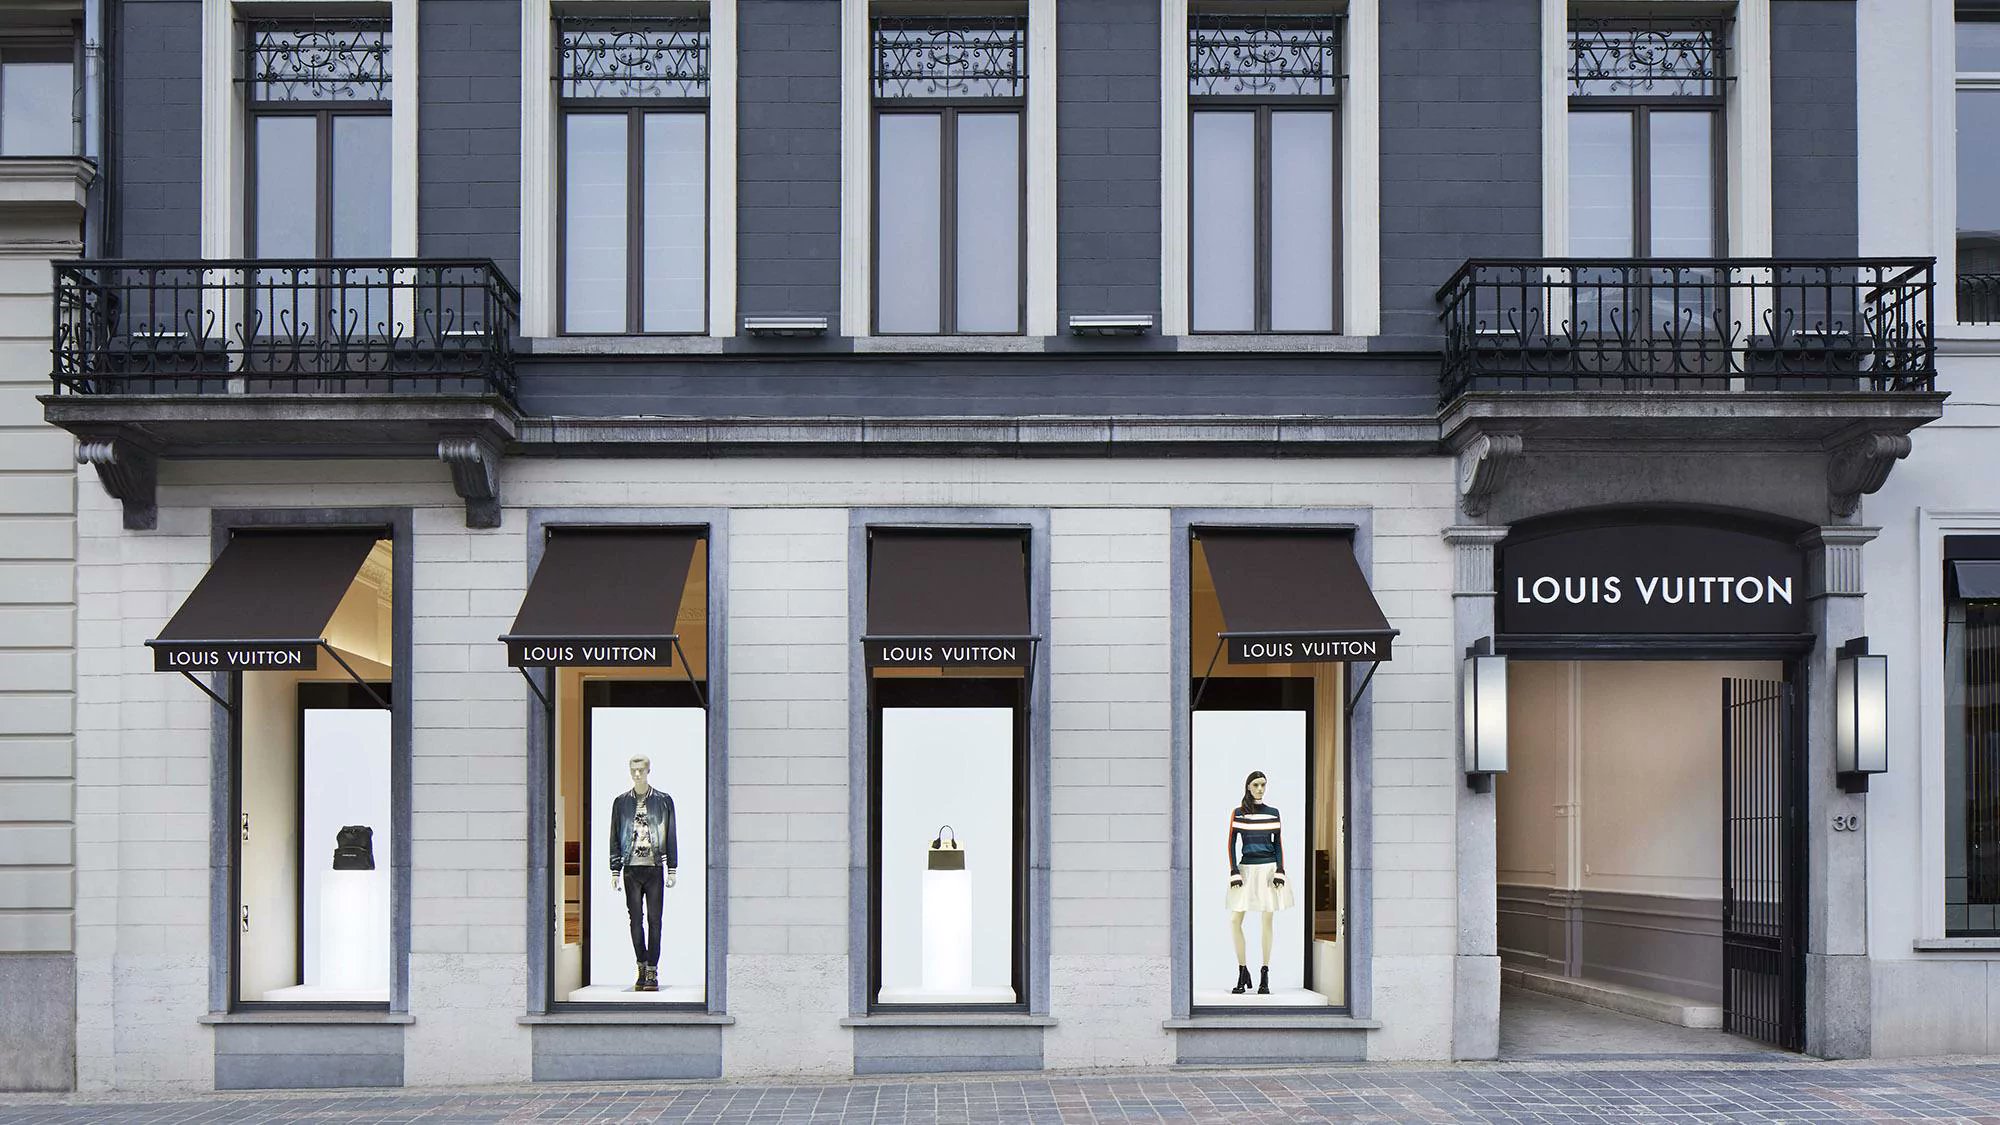 CPP-LUXURY.COM on Twitter: Vuitton opens newly renovated store in Brussels - the largest store in the BeNeLux area PREVIEW https://t.co/uiRcMdv6v8 #LouisVuitton #Brussels #Bruxelles #newopening #luxury #luxurystore #Belgium #BeNeLux ...